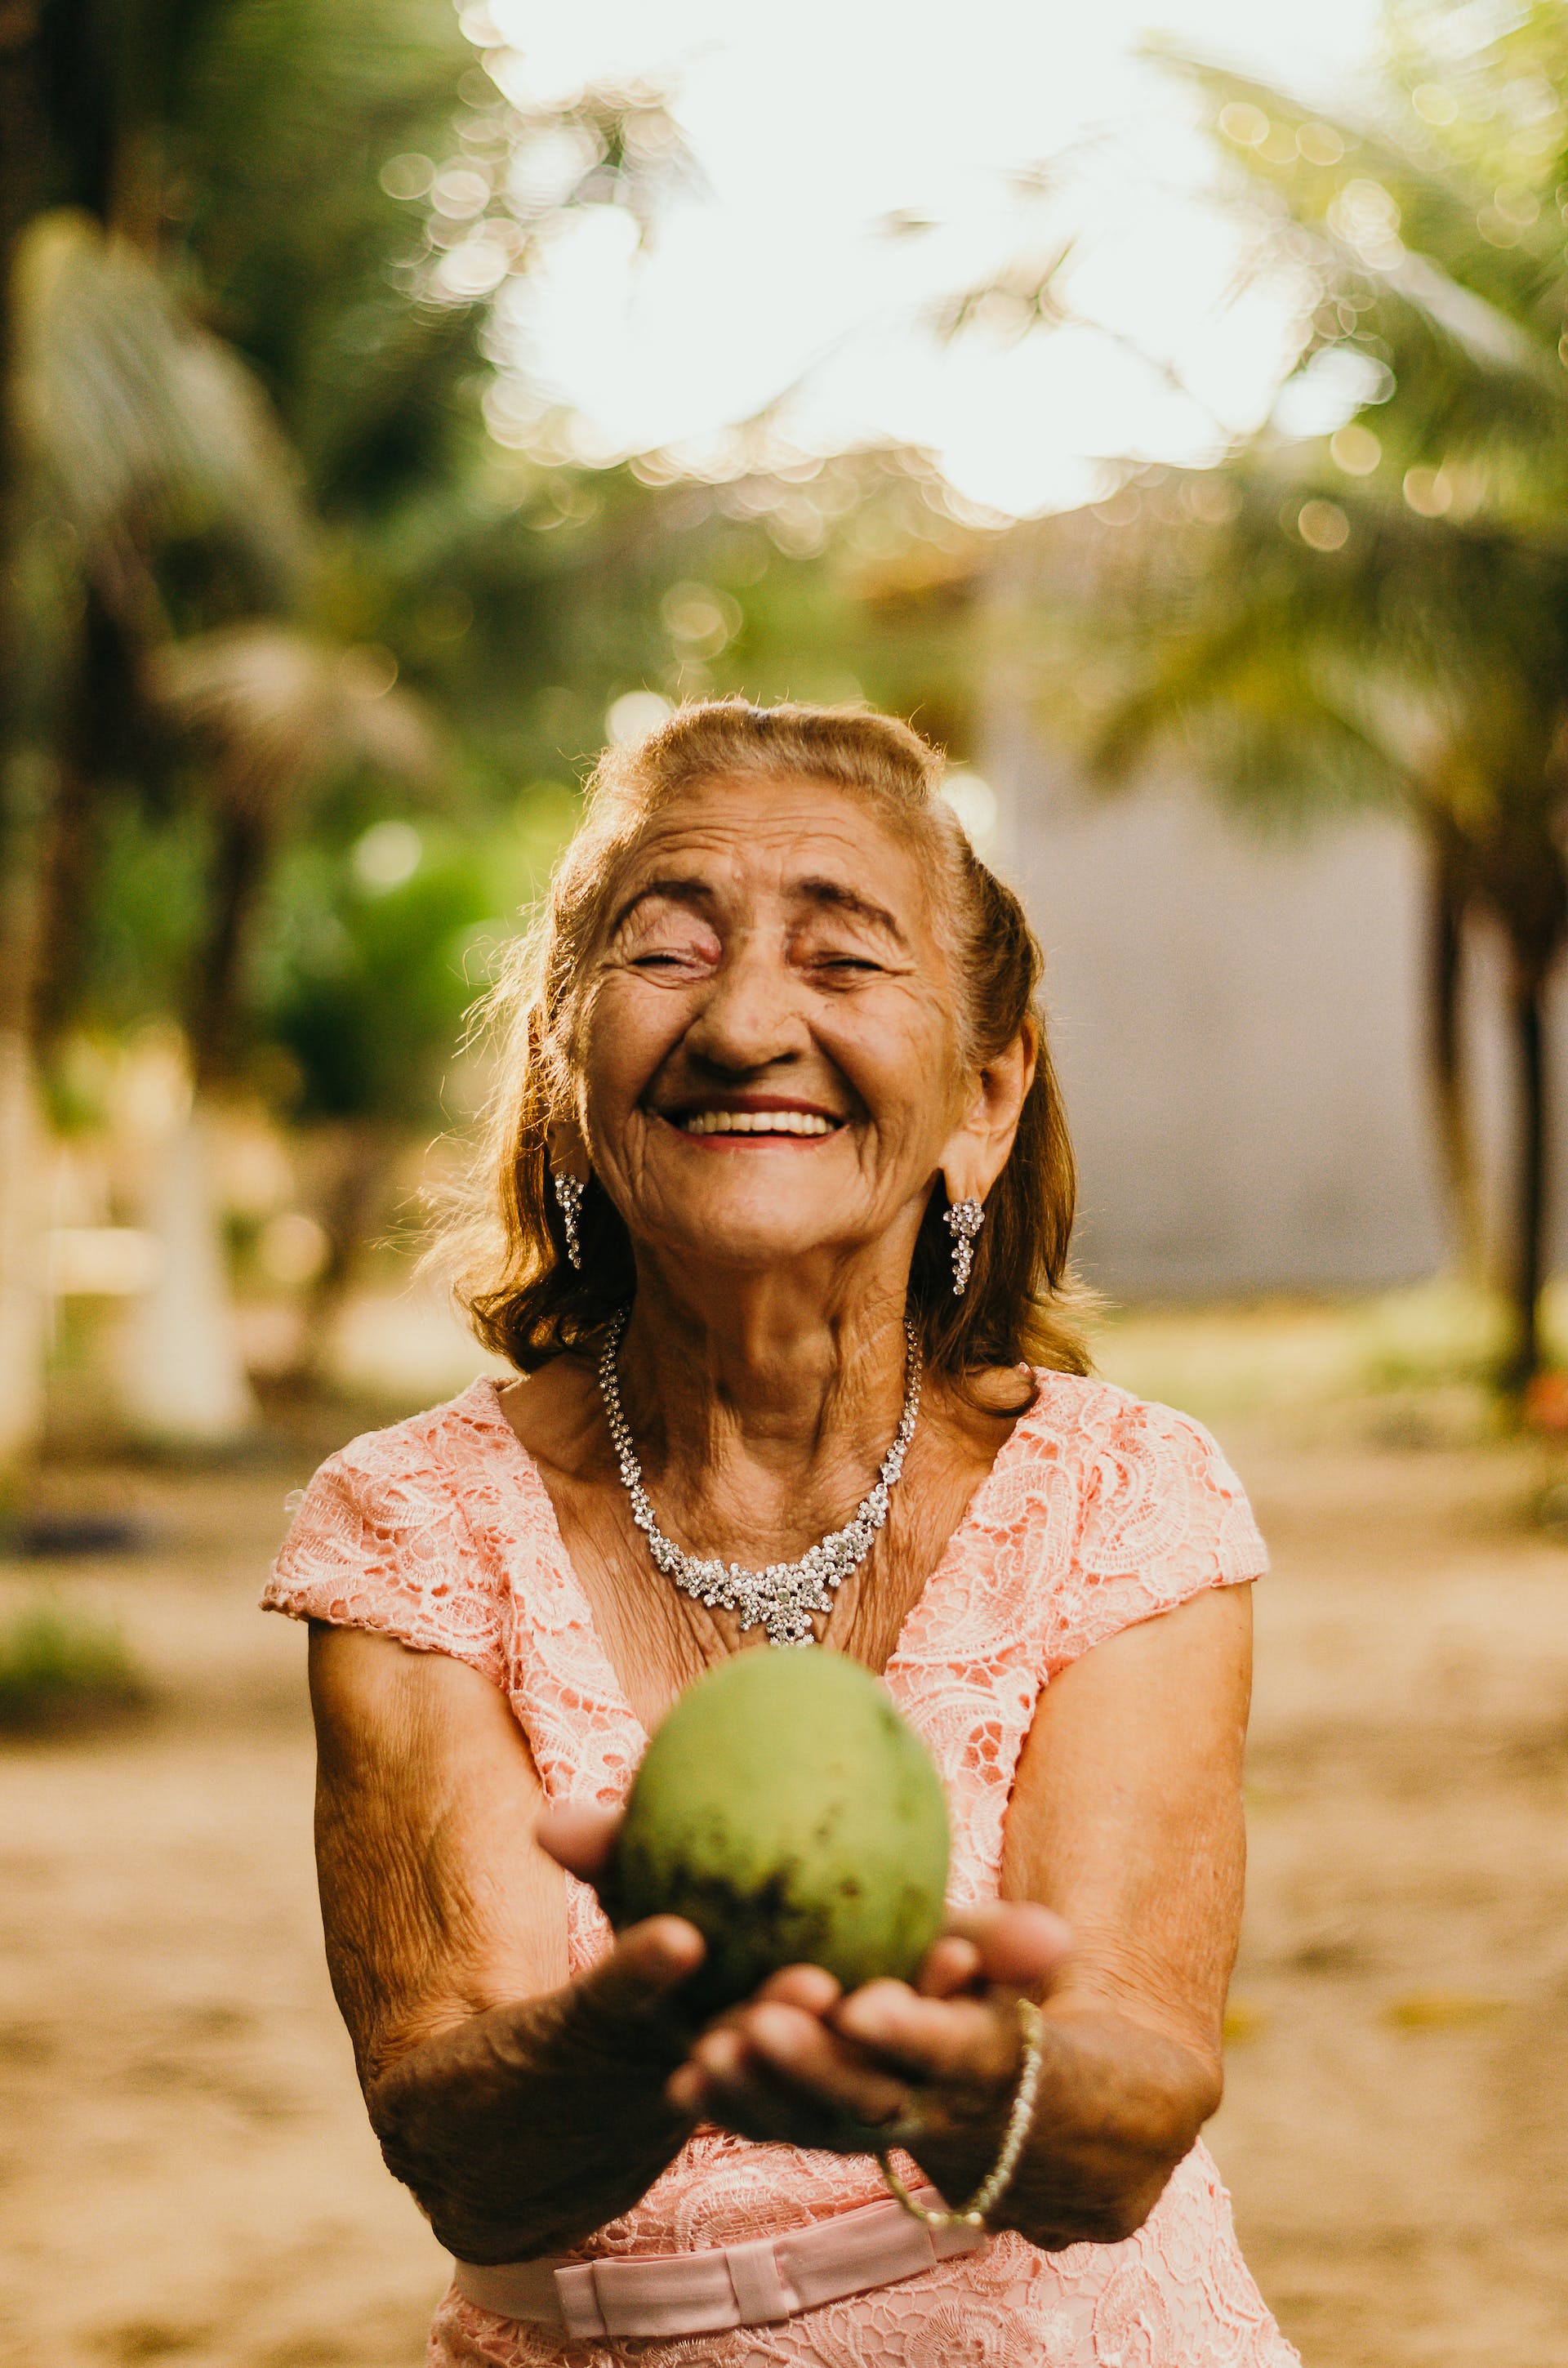 Old woman smiling and holding a coconut | Source: Pexels